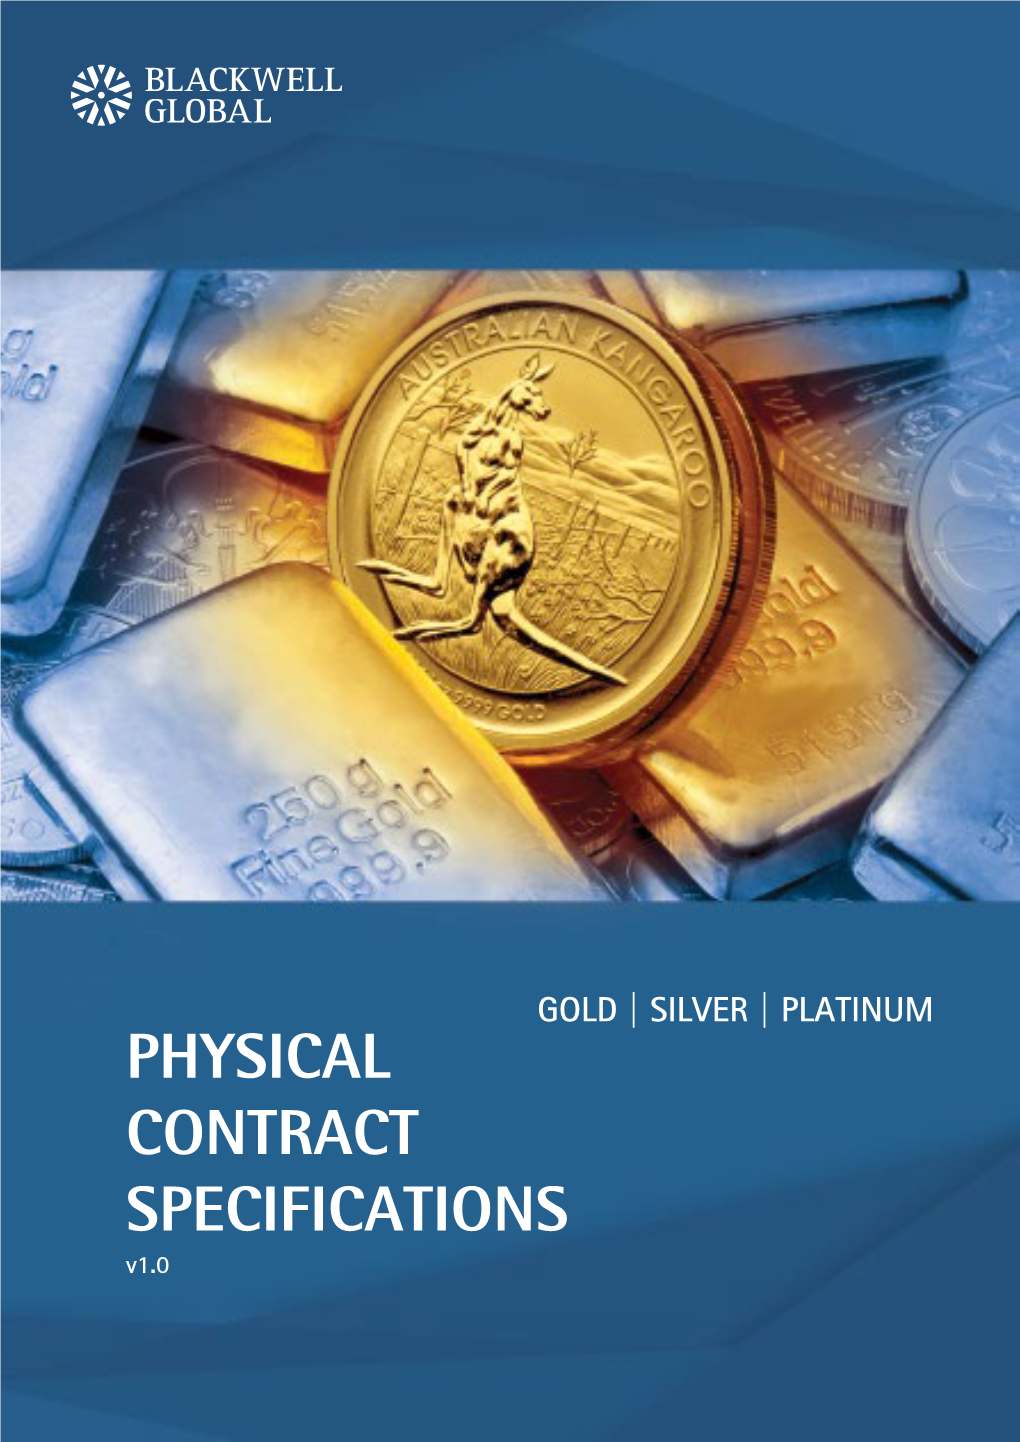 PHYSICAL CONTRACT SPECIFICATIONS V1.0 TABLE of CONTENTS SECTION 1.0